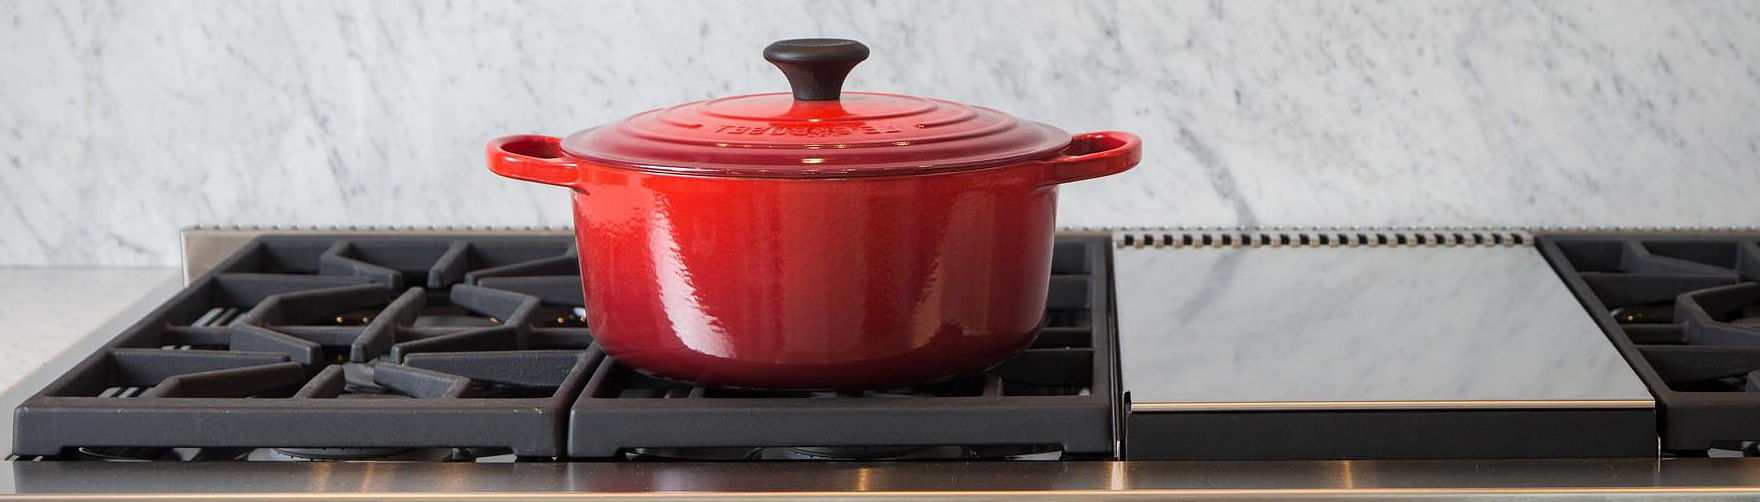 https://dutchovenscookware.gumlet.io/wp-content/uploads/2018/06/Can-you-use-a-dutch-oven-on-the-stove.jpg?compress=true&quality=80&w=800&dpr=2.6